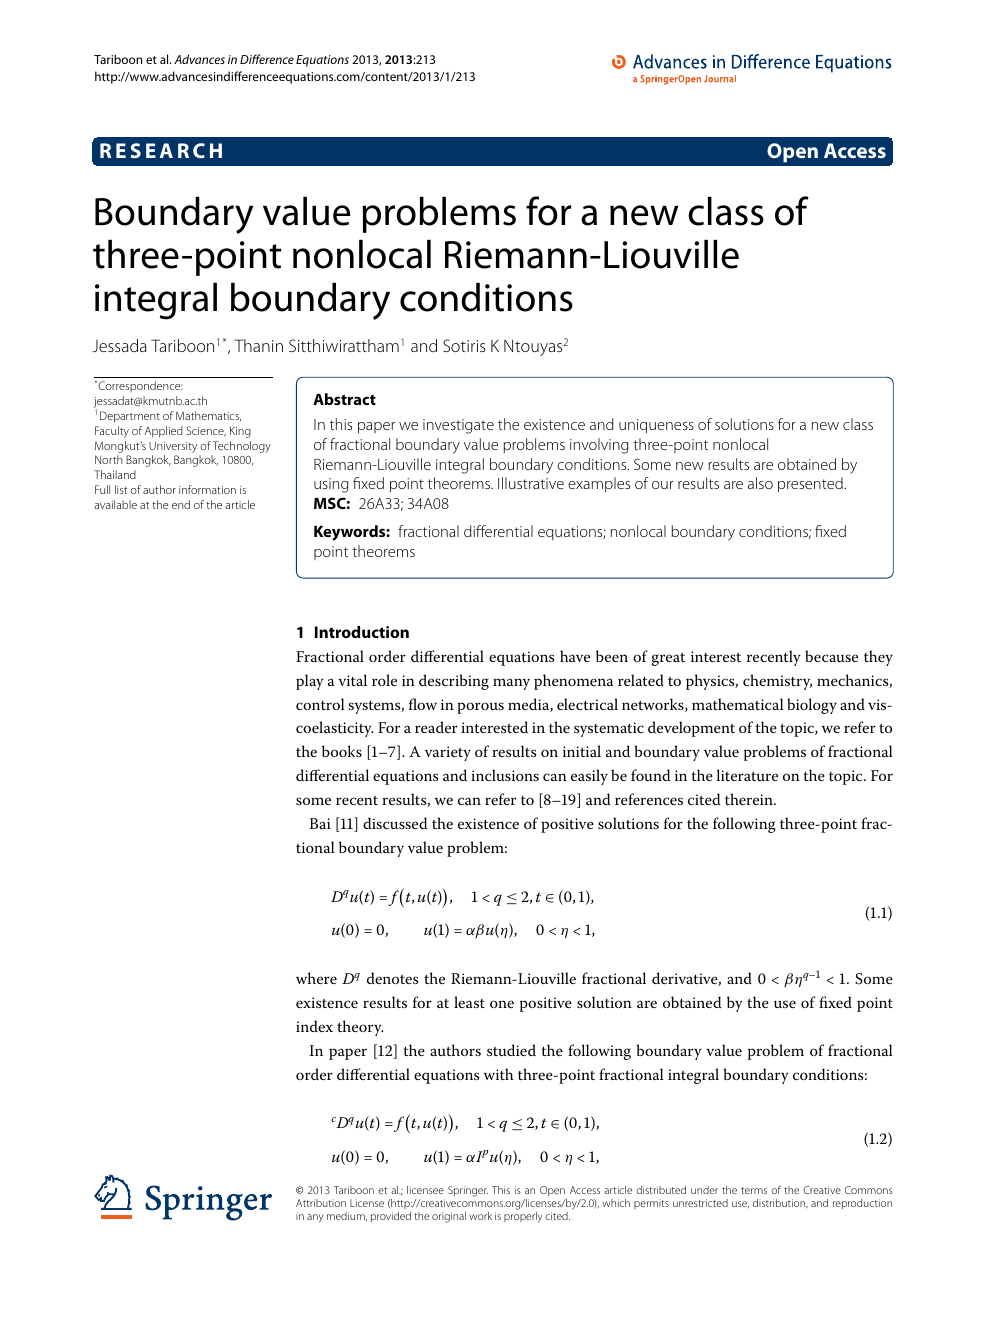 Boundary Value Problems For A New Class Of Three Point Nonlocal Riemann Liouville Integral Boundary Conditions Topic Of Research Paper In Mathematics Download Scholarly Article Pdf And Read For Free On Cyberleninka Open